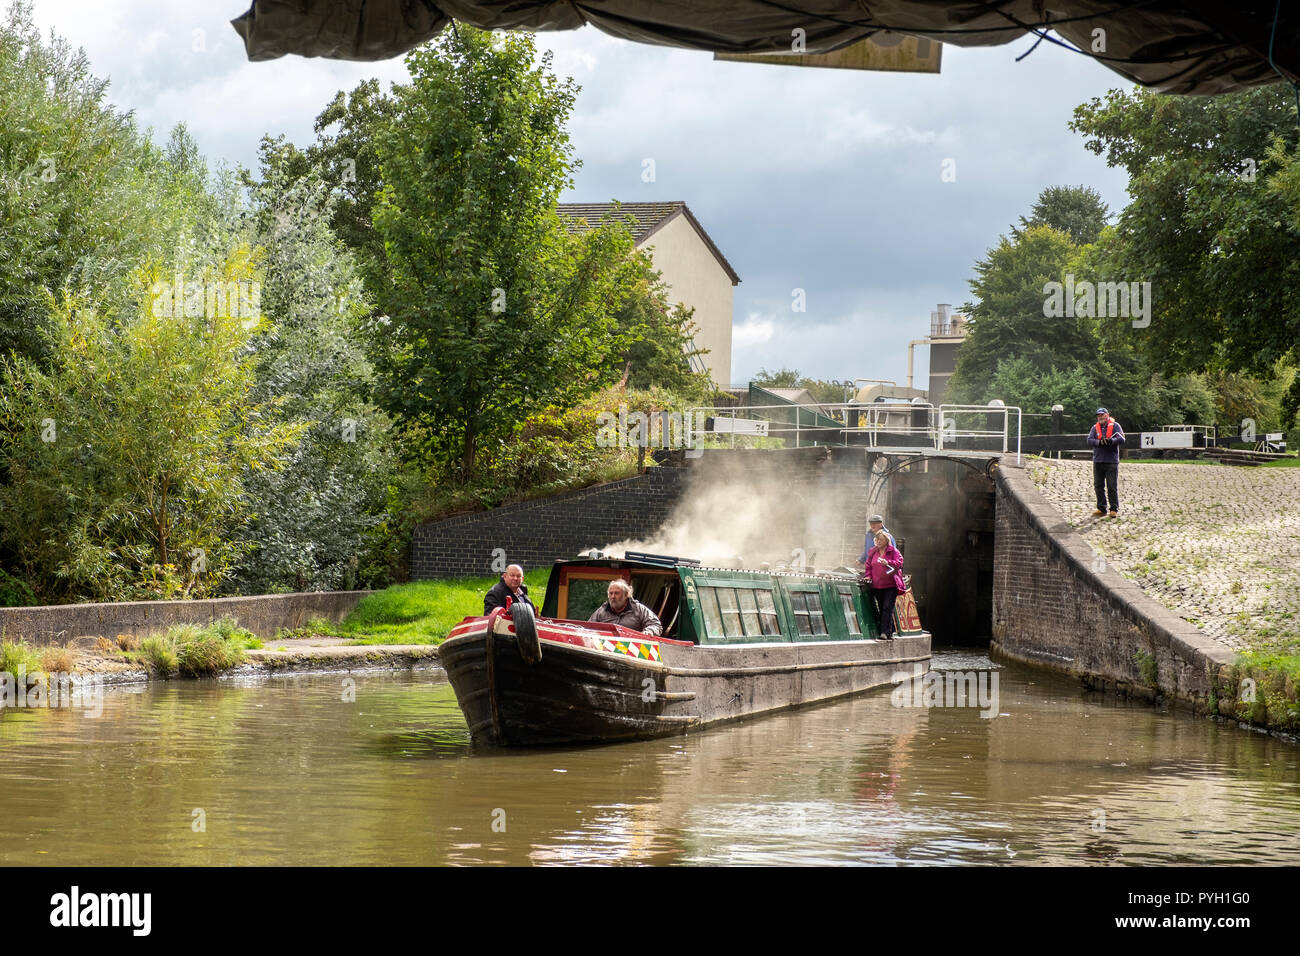 Narrow boat with coal fire heating on the Trent and Mersey Canal in Middlewich Cheshire UK Stock Photo